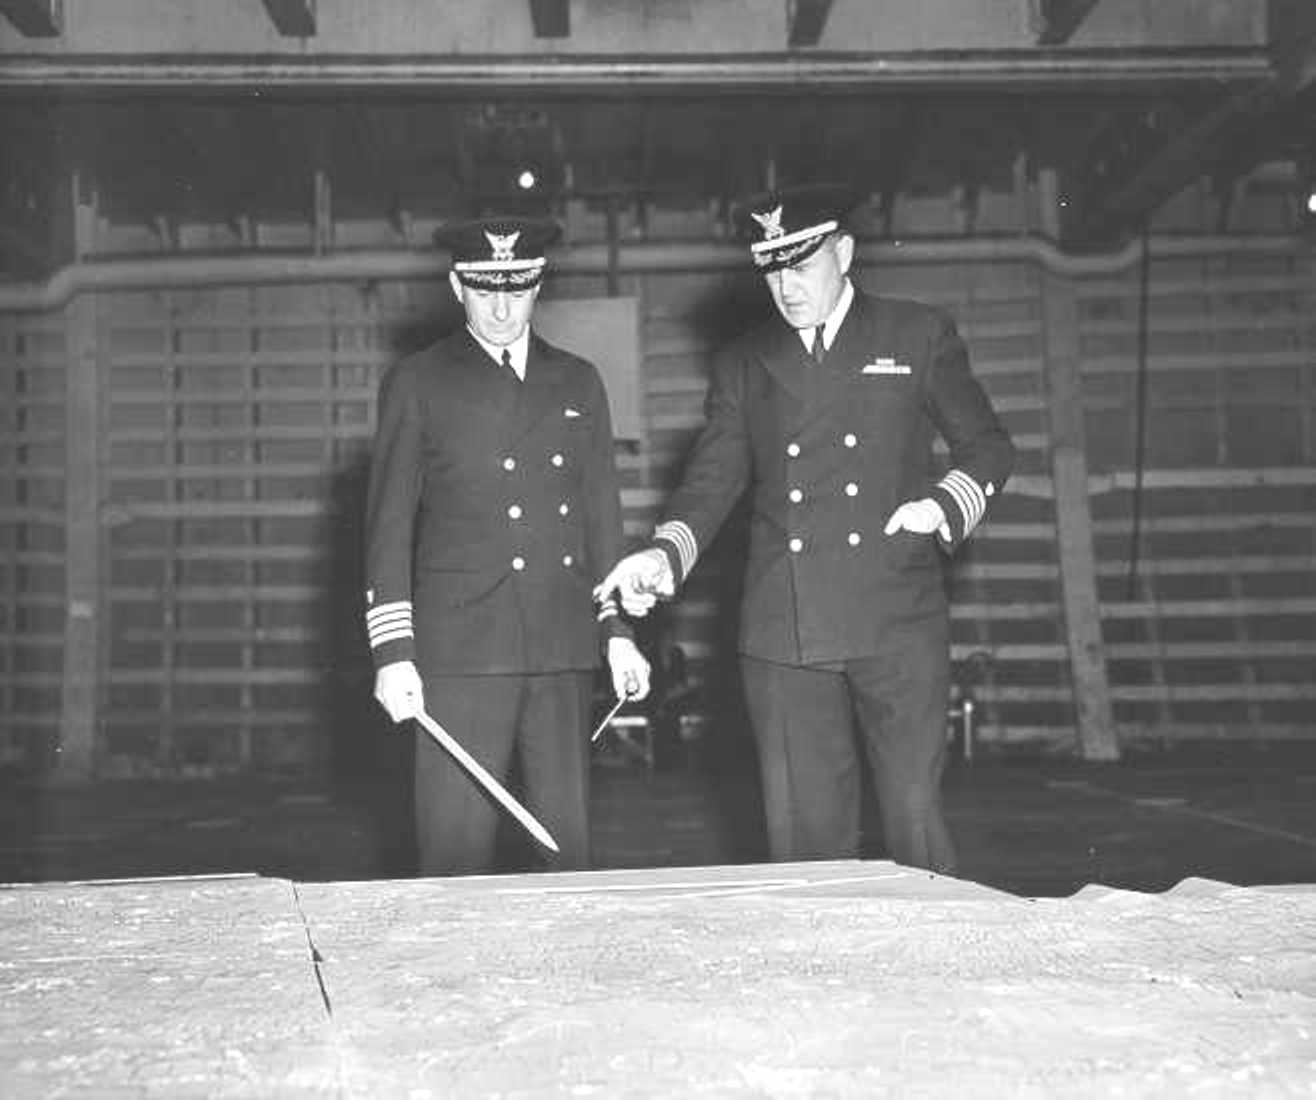 United States Coast Guard Captains Edward Fritzche (left) and Miles Imlay (right) examining a relief map of Omaha Beach laid out in the hold of the Attack Transport USS Samuel Chase, Jun 1944.